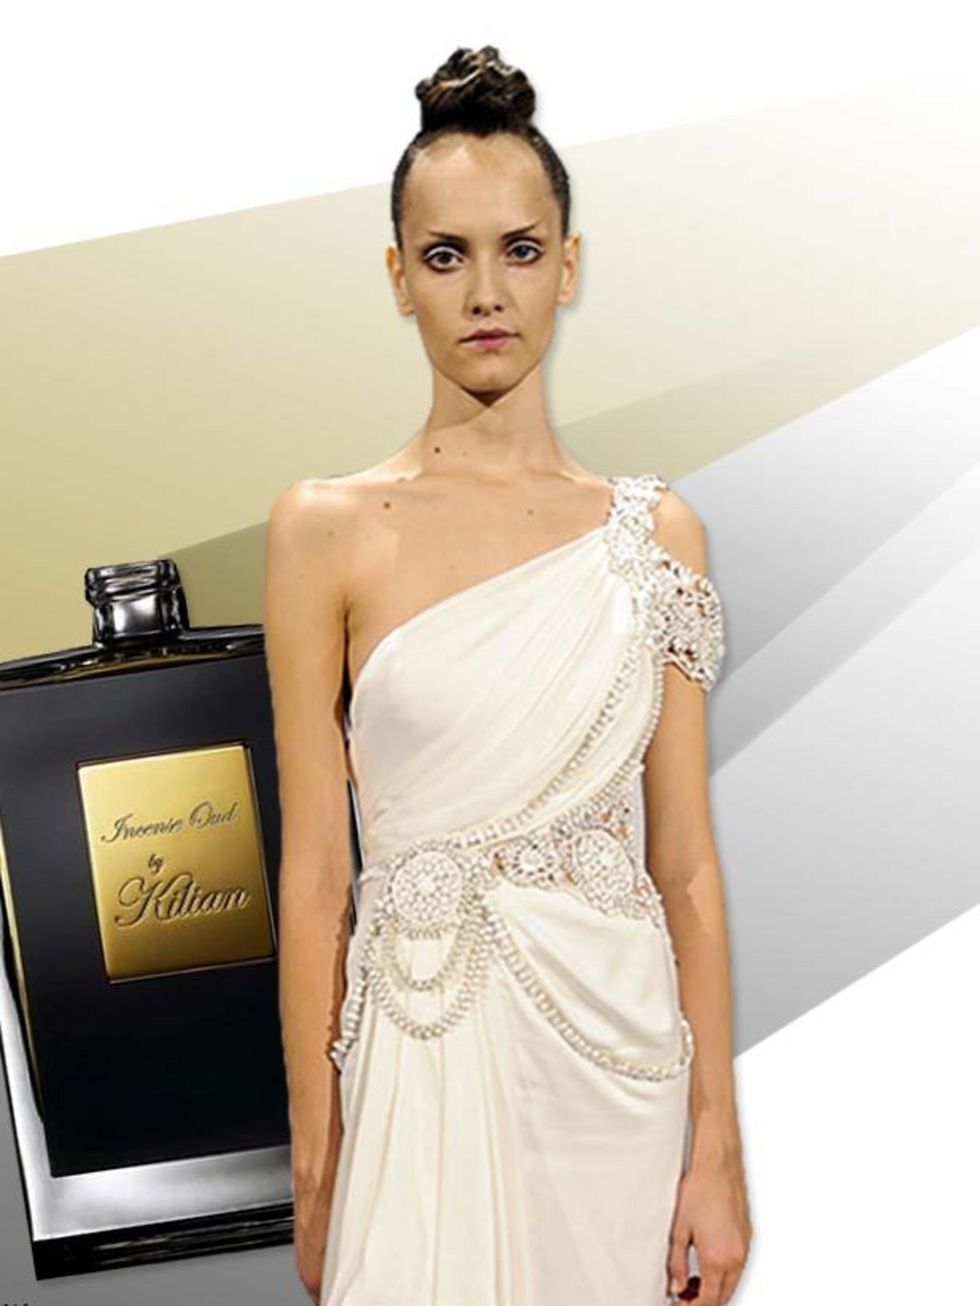 <p>As a Mysterious Girl you attend events worthy of intricately designed elegant gowns from the likes of <a href="http://www.elleuk.com/catwalk/collections/marchesa/">Marchesa</a> and choose to wear heady smoky scents that subtly hint towards luxury. By K